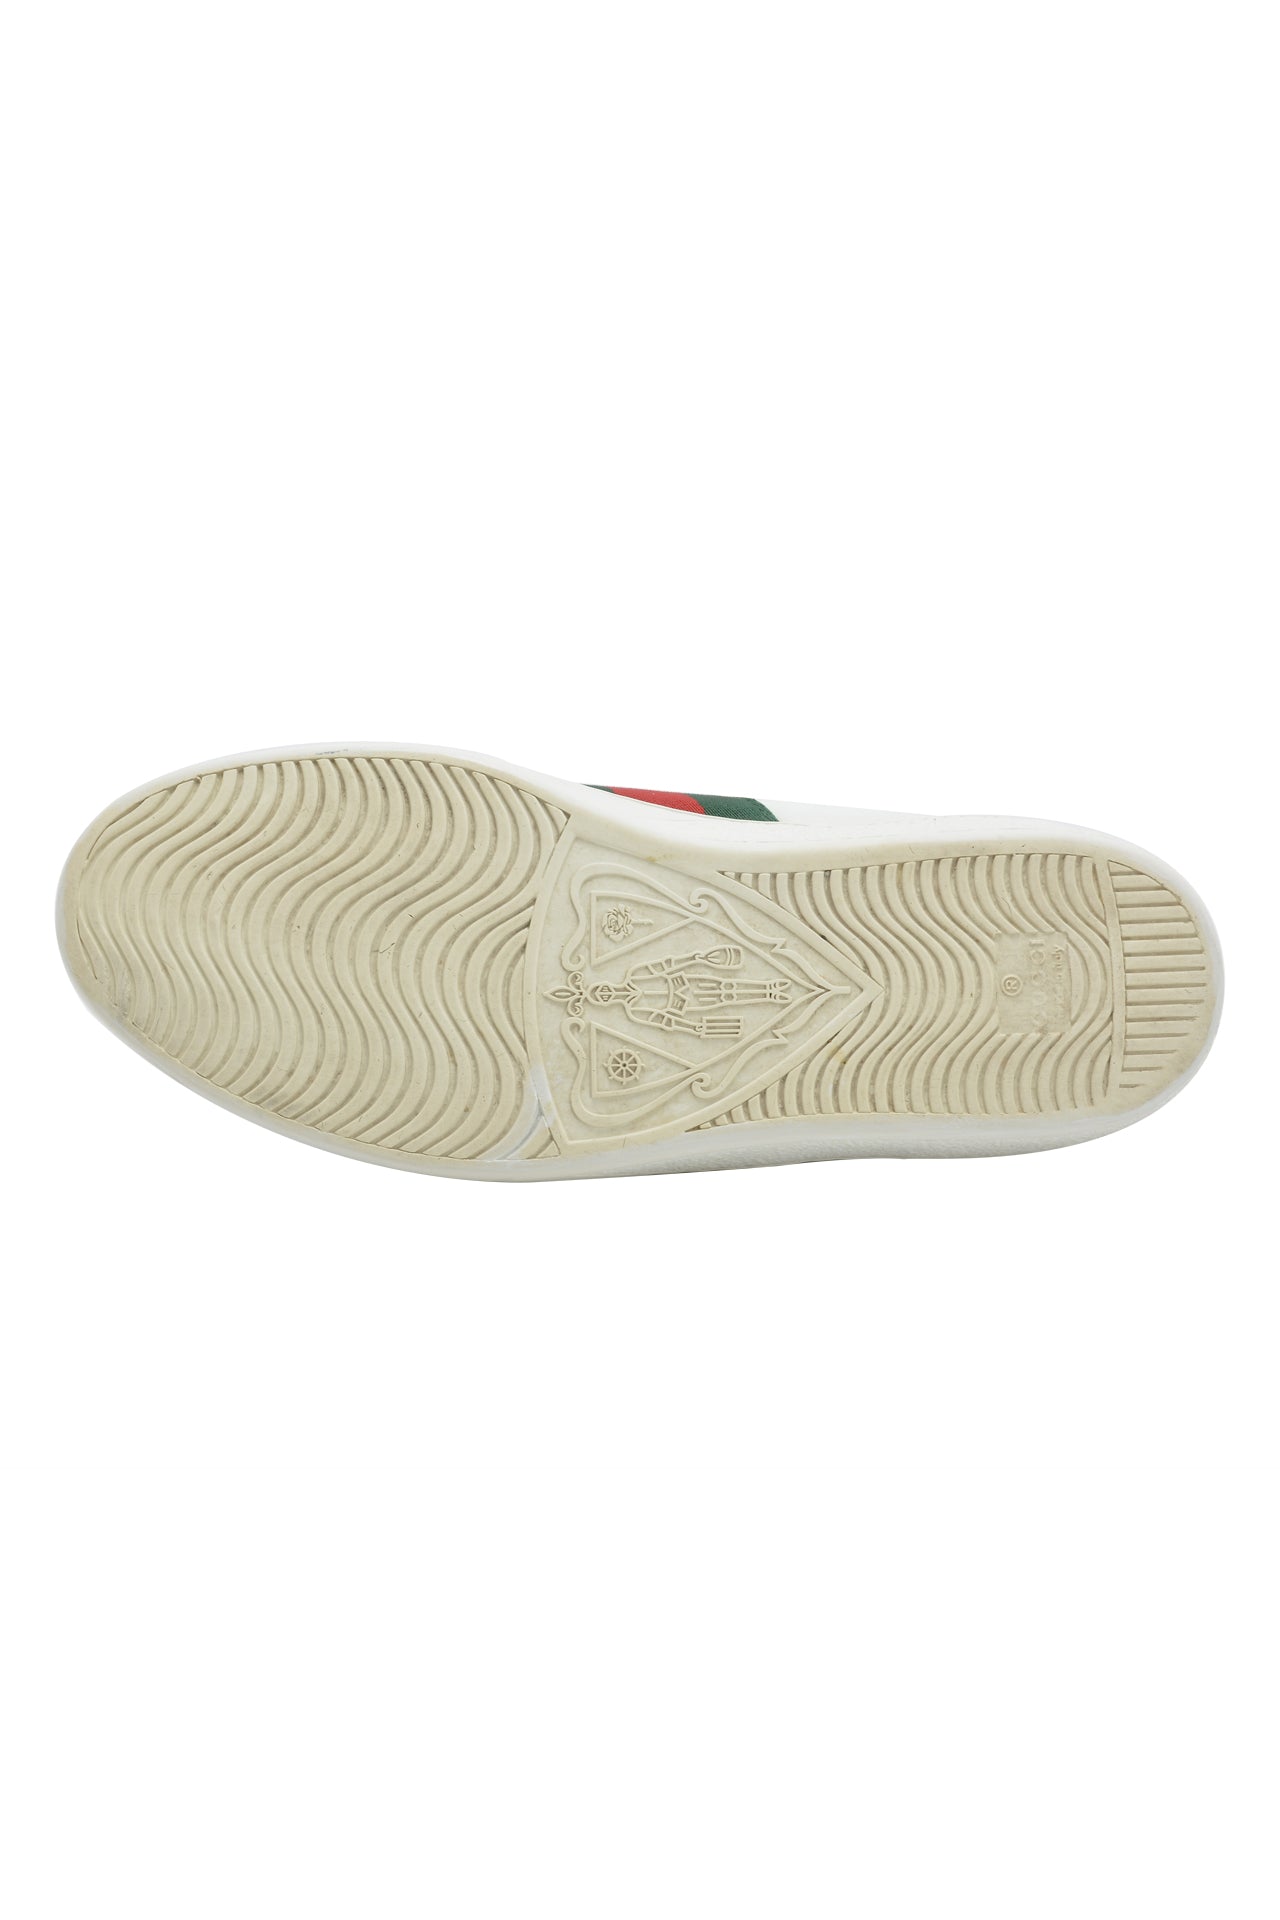 Gucci White Leather Ace Low Top Sneakers EU 40